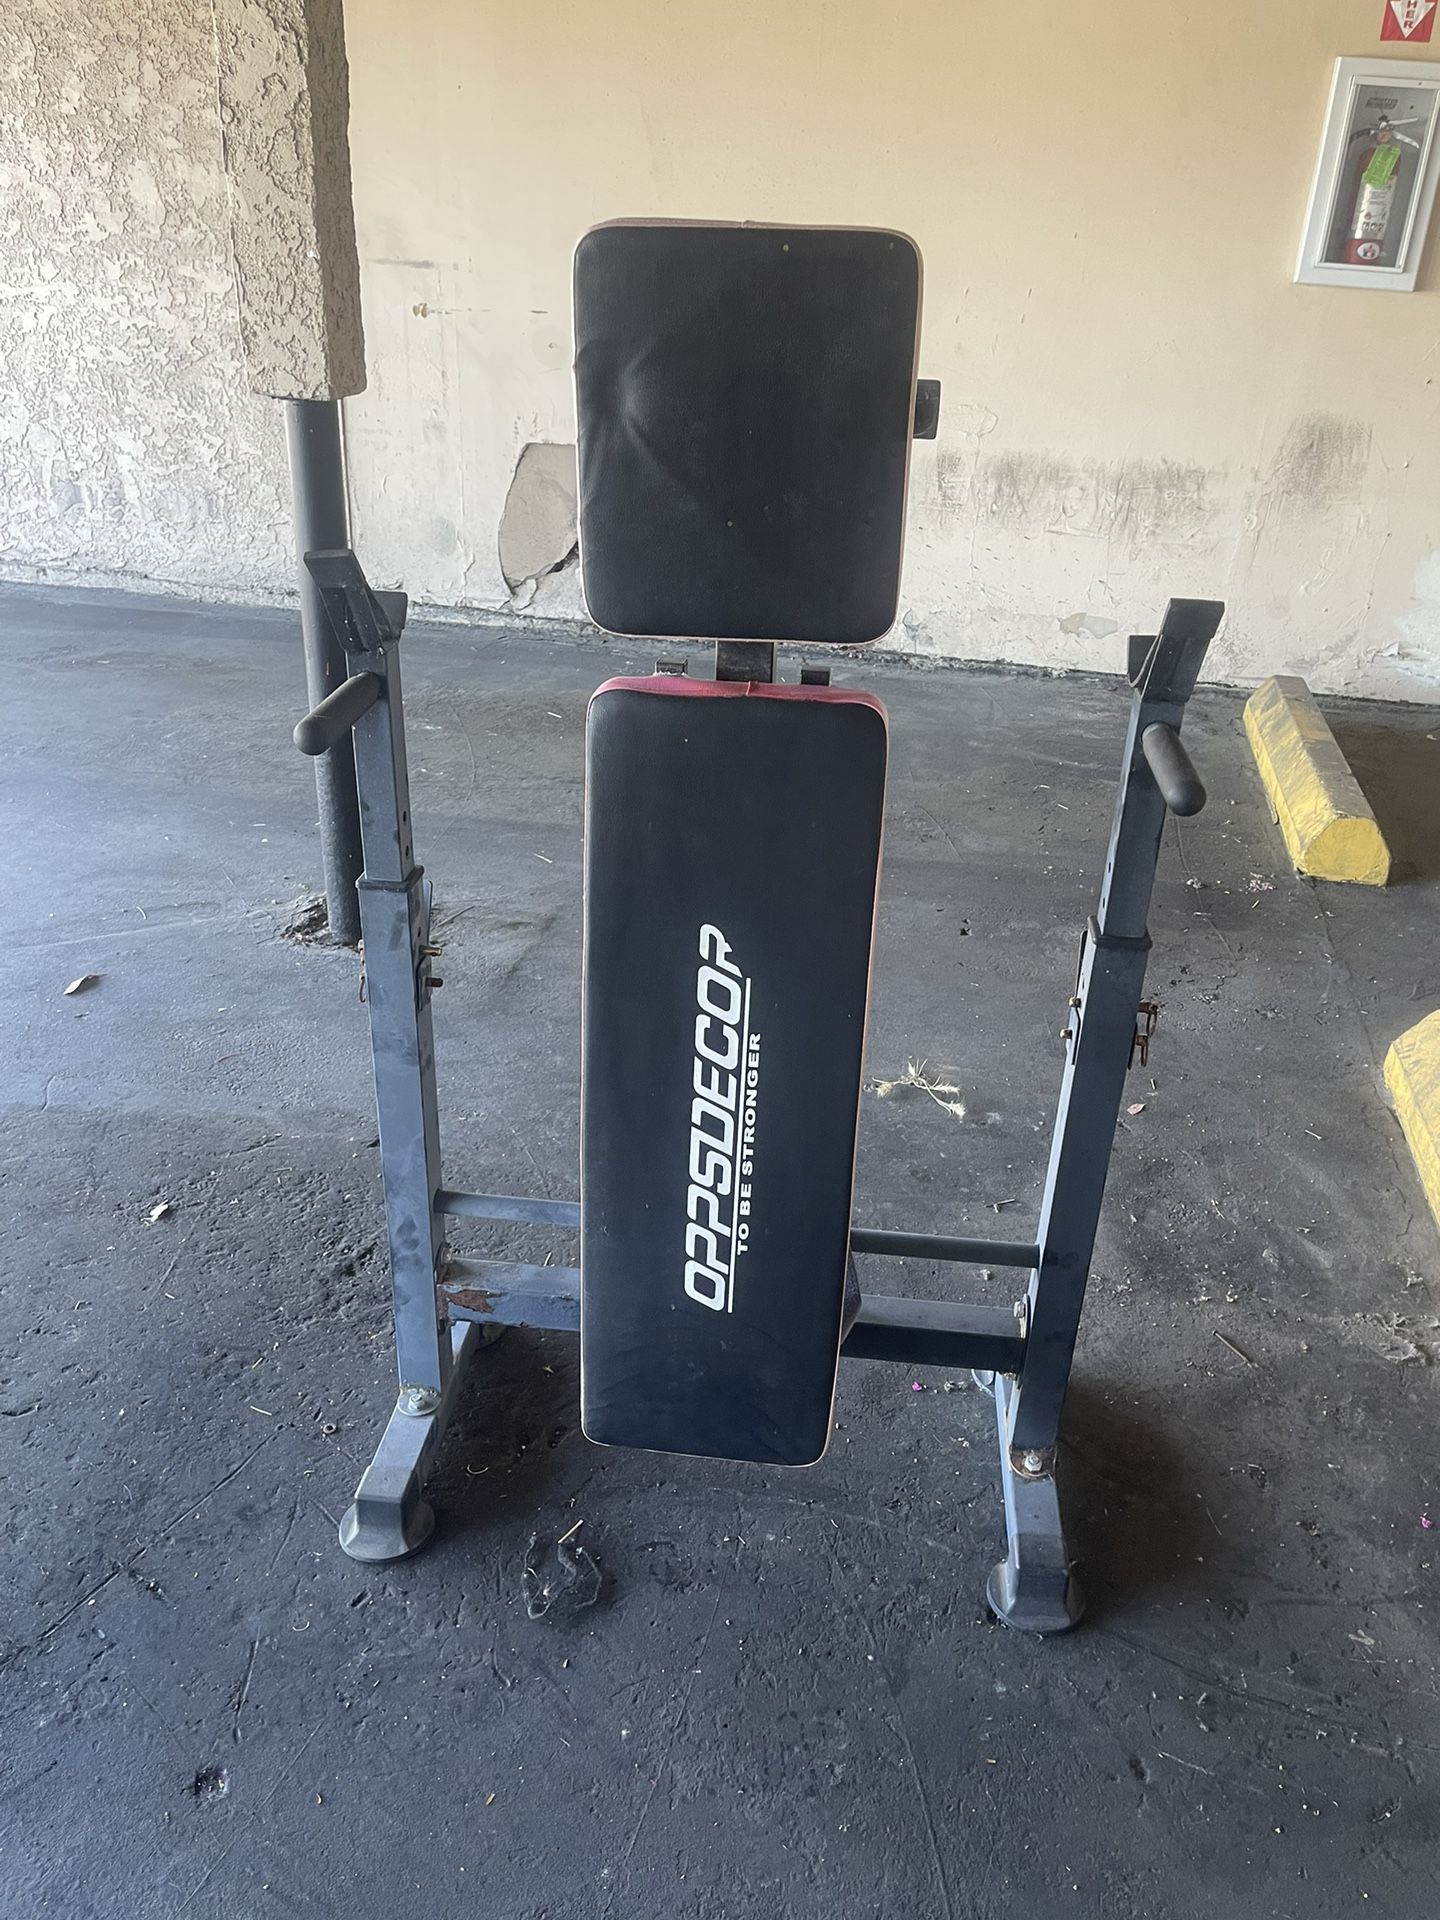 Weight Bench With Dip Bar 